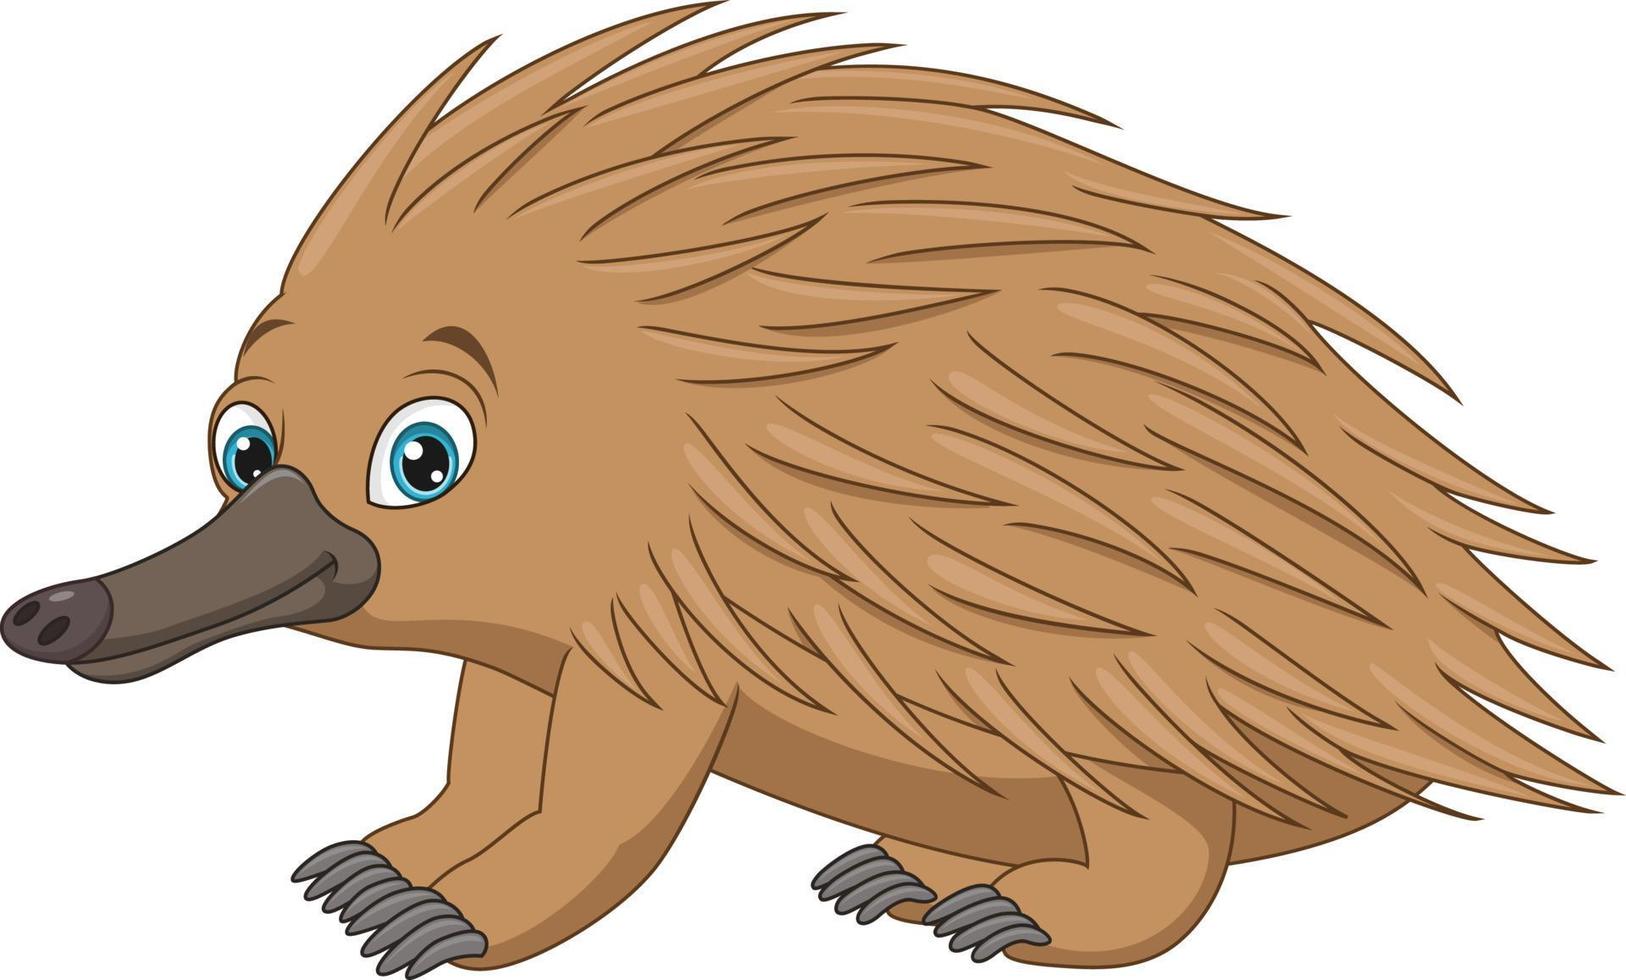 Cartoon echidna isolated on white background vector